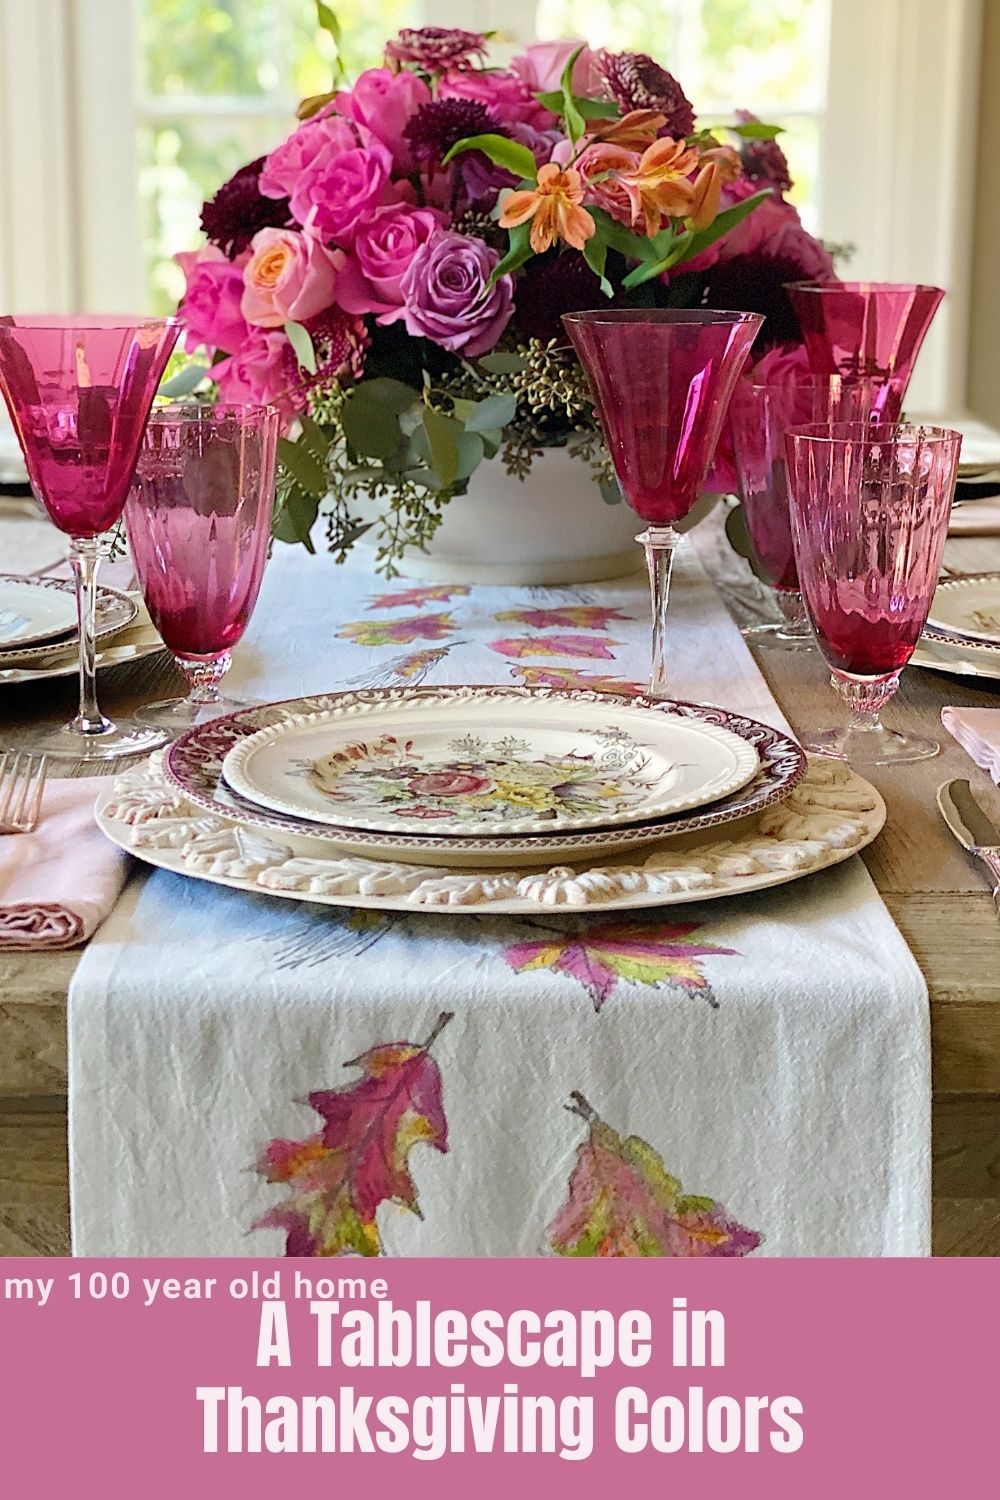 I love creating a tablescape in Thanksgiving colors. I made the table runner and used a vintage flea market bowl for my holiday centerpiece.